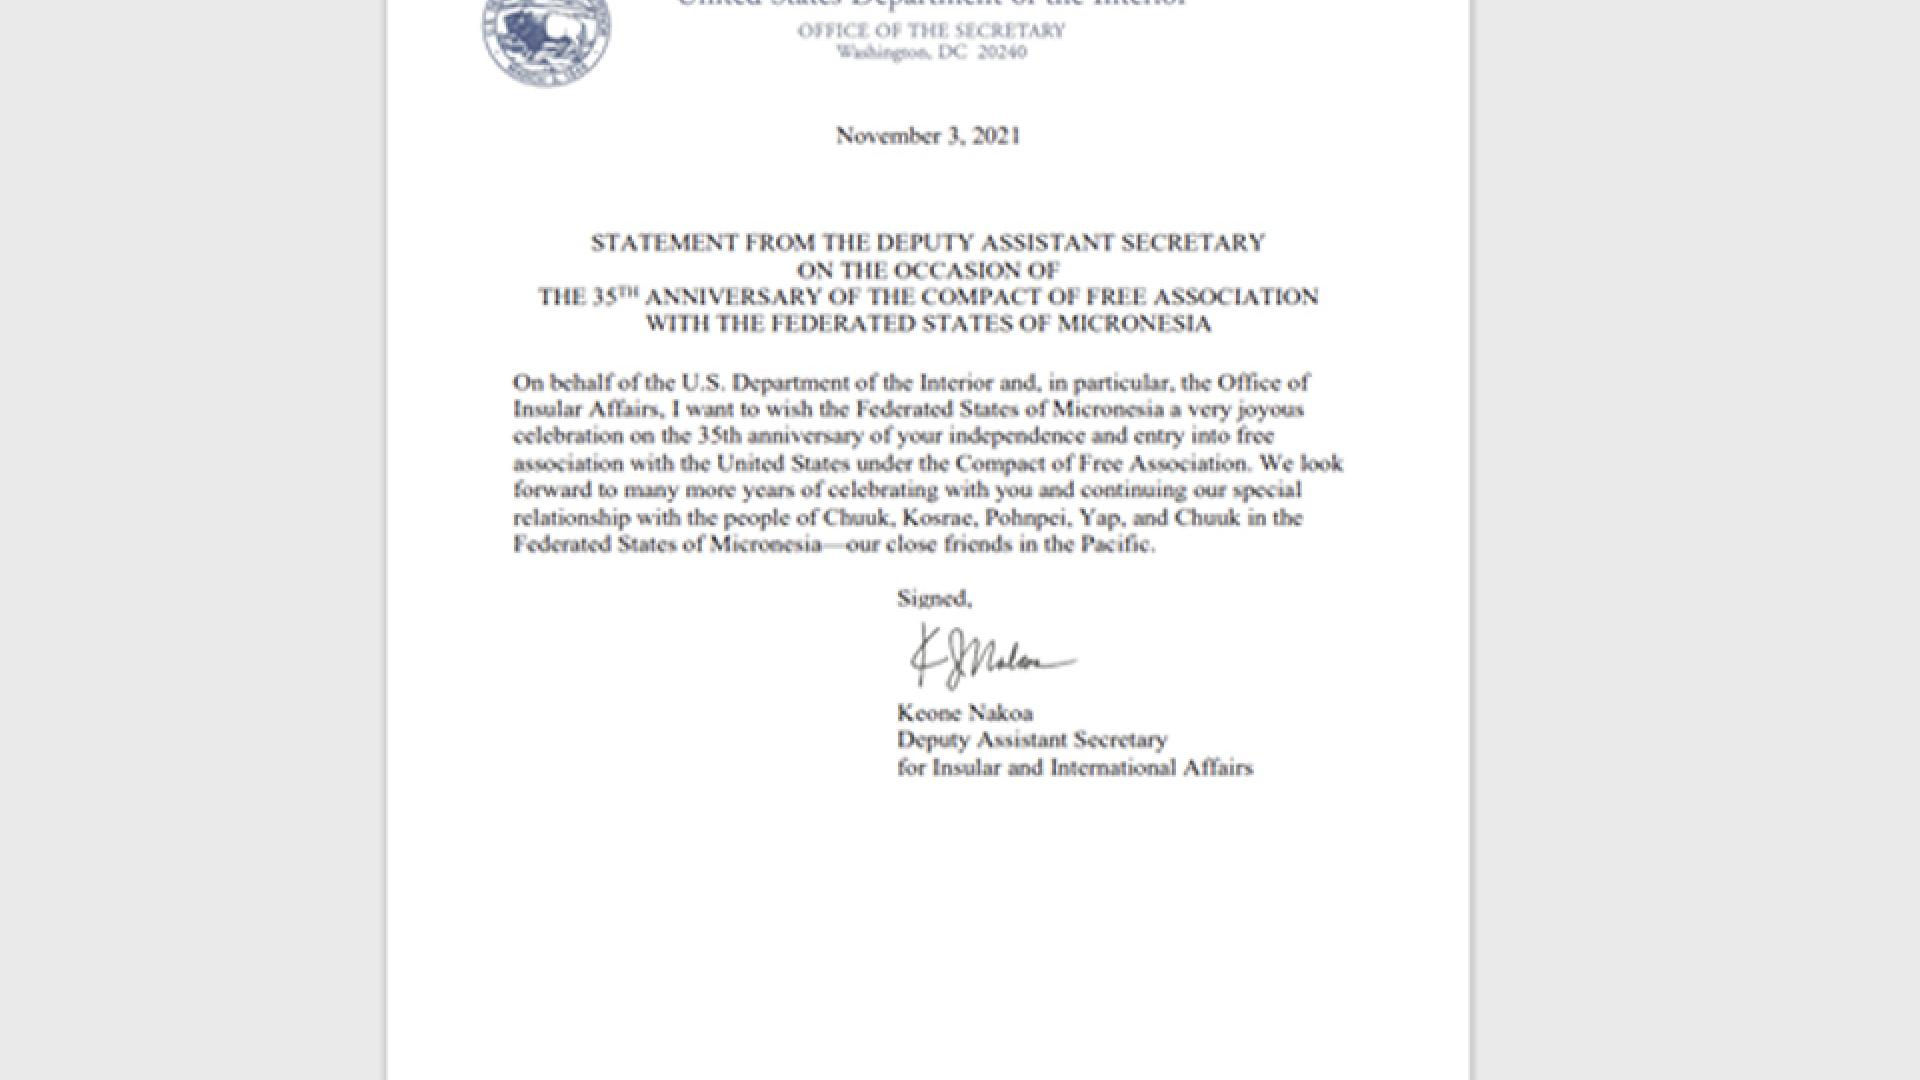 Statement from the Deputy Assistant Secretary on the 35th anniversary